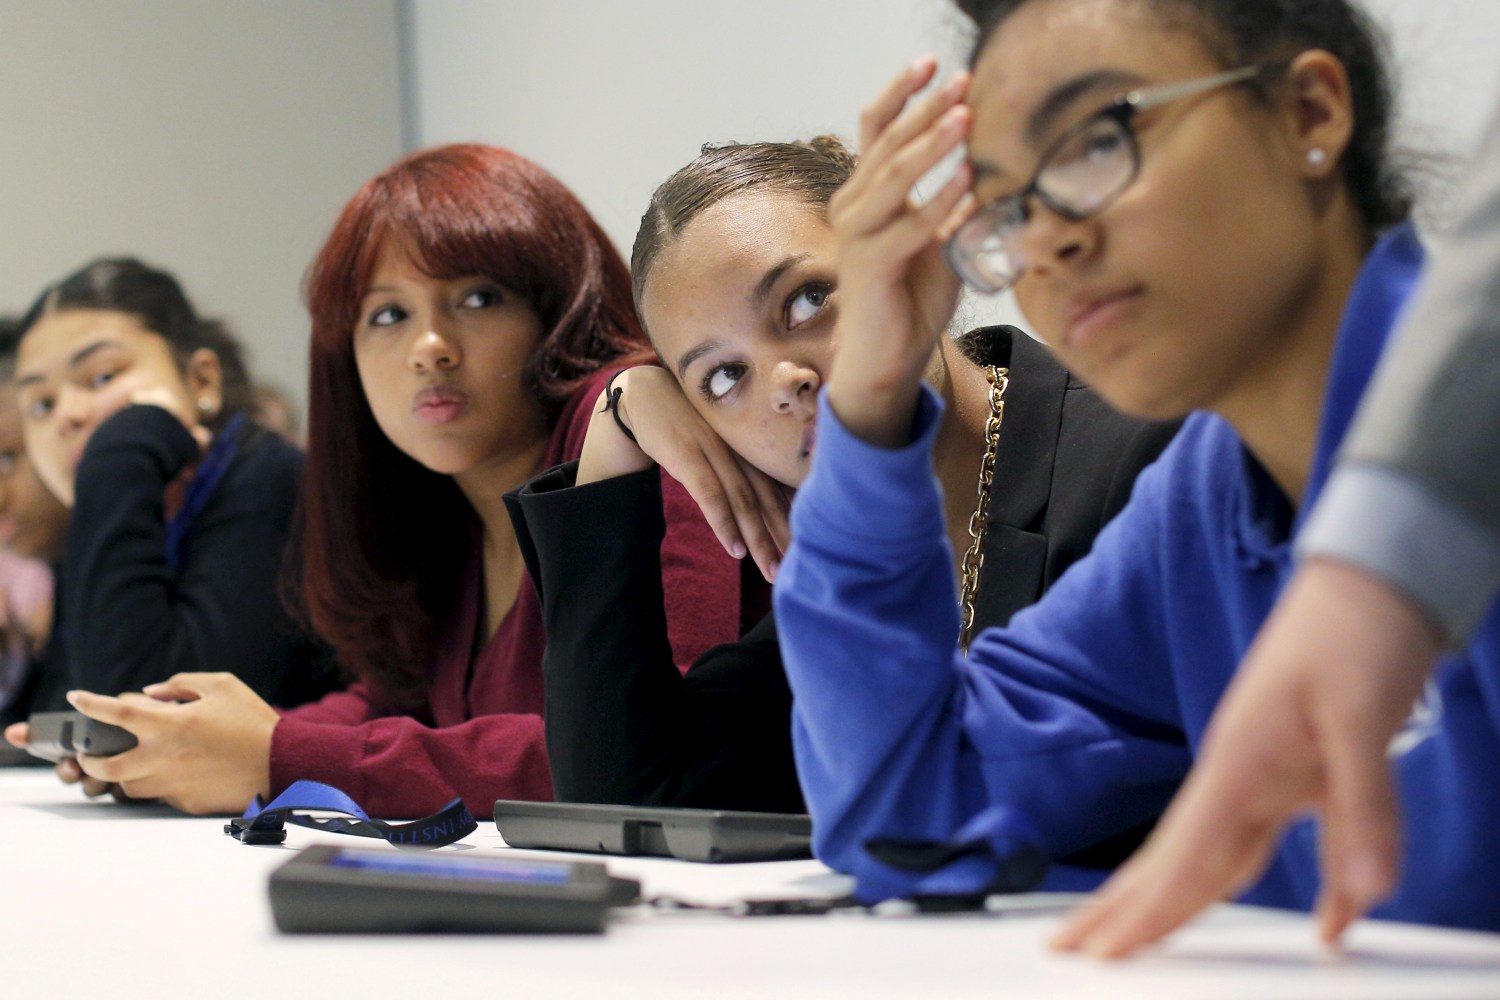 High school students from the City on a Hill Charter Public School play the role of U.S. senators during a mock legislative session of the U.S. Senate chamber at the Edward M. Kennedy Institute in Boston, Massachusetts